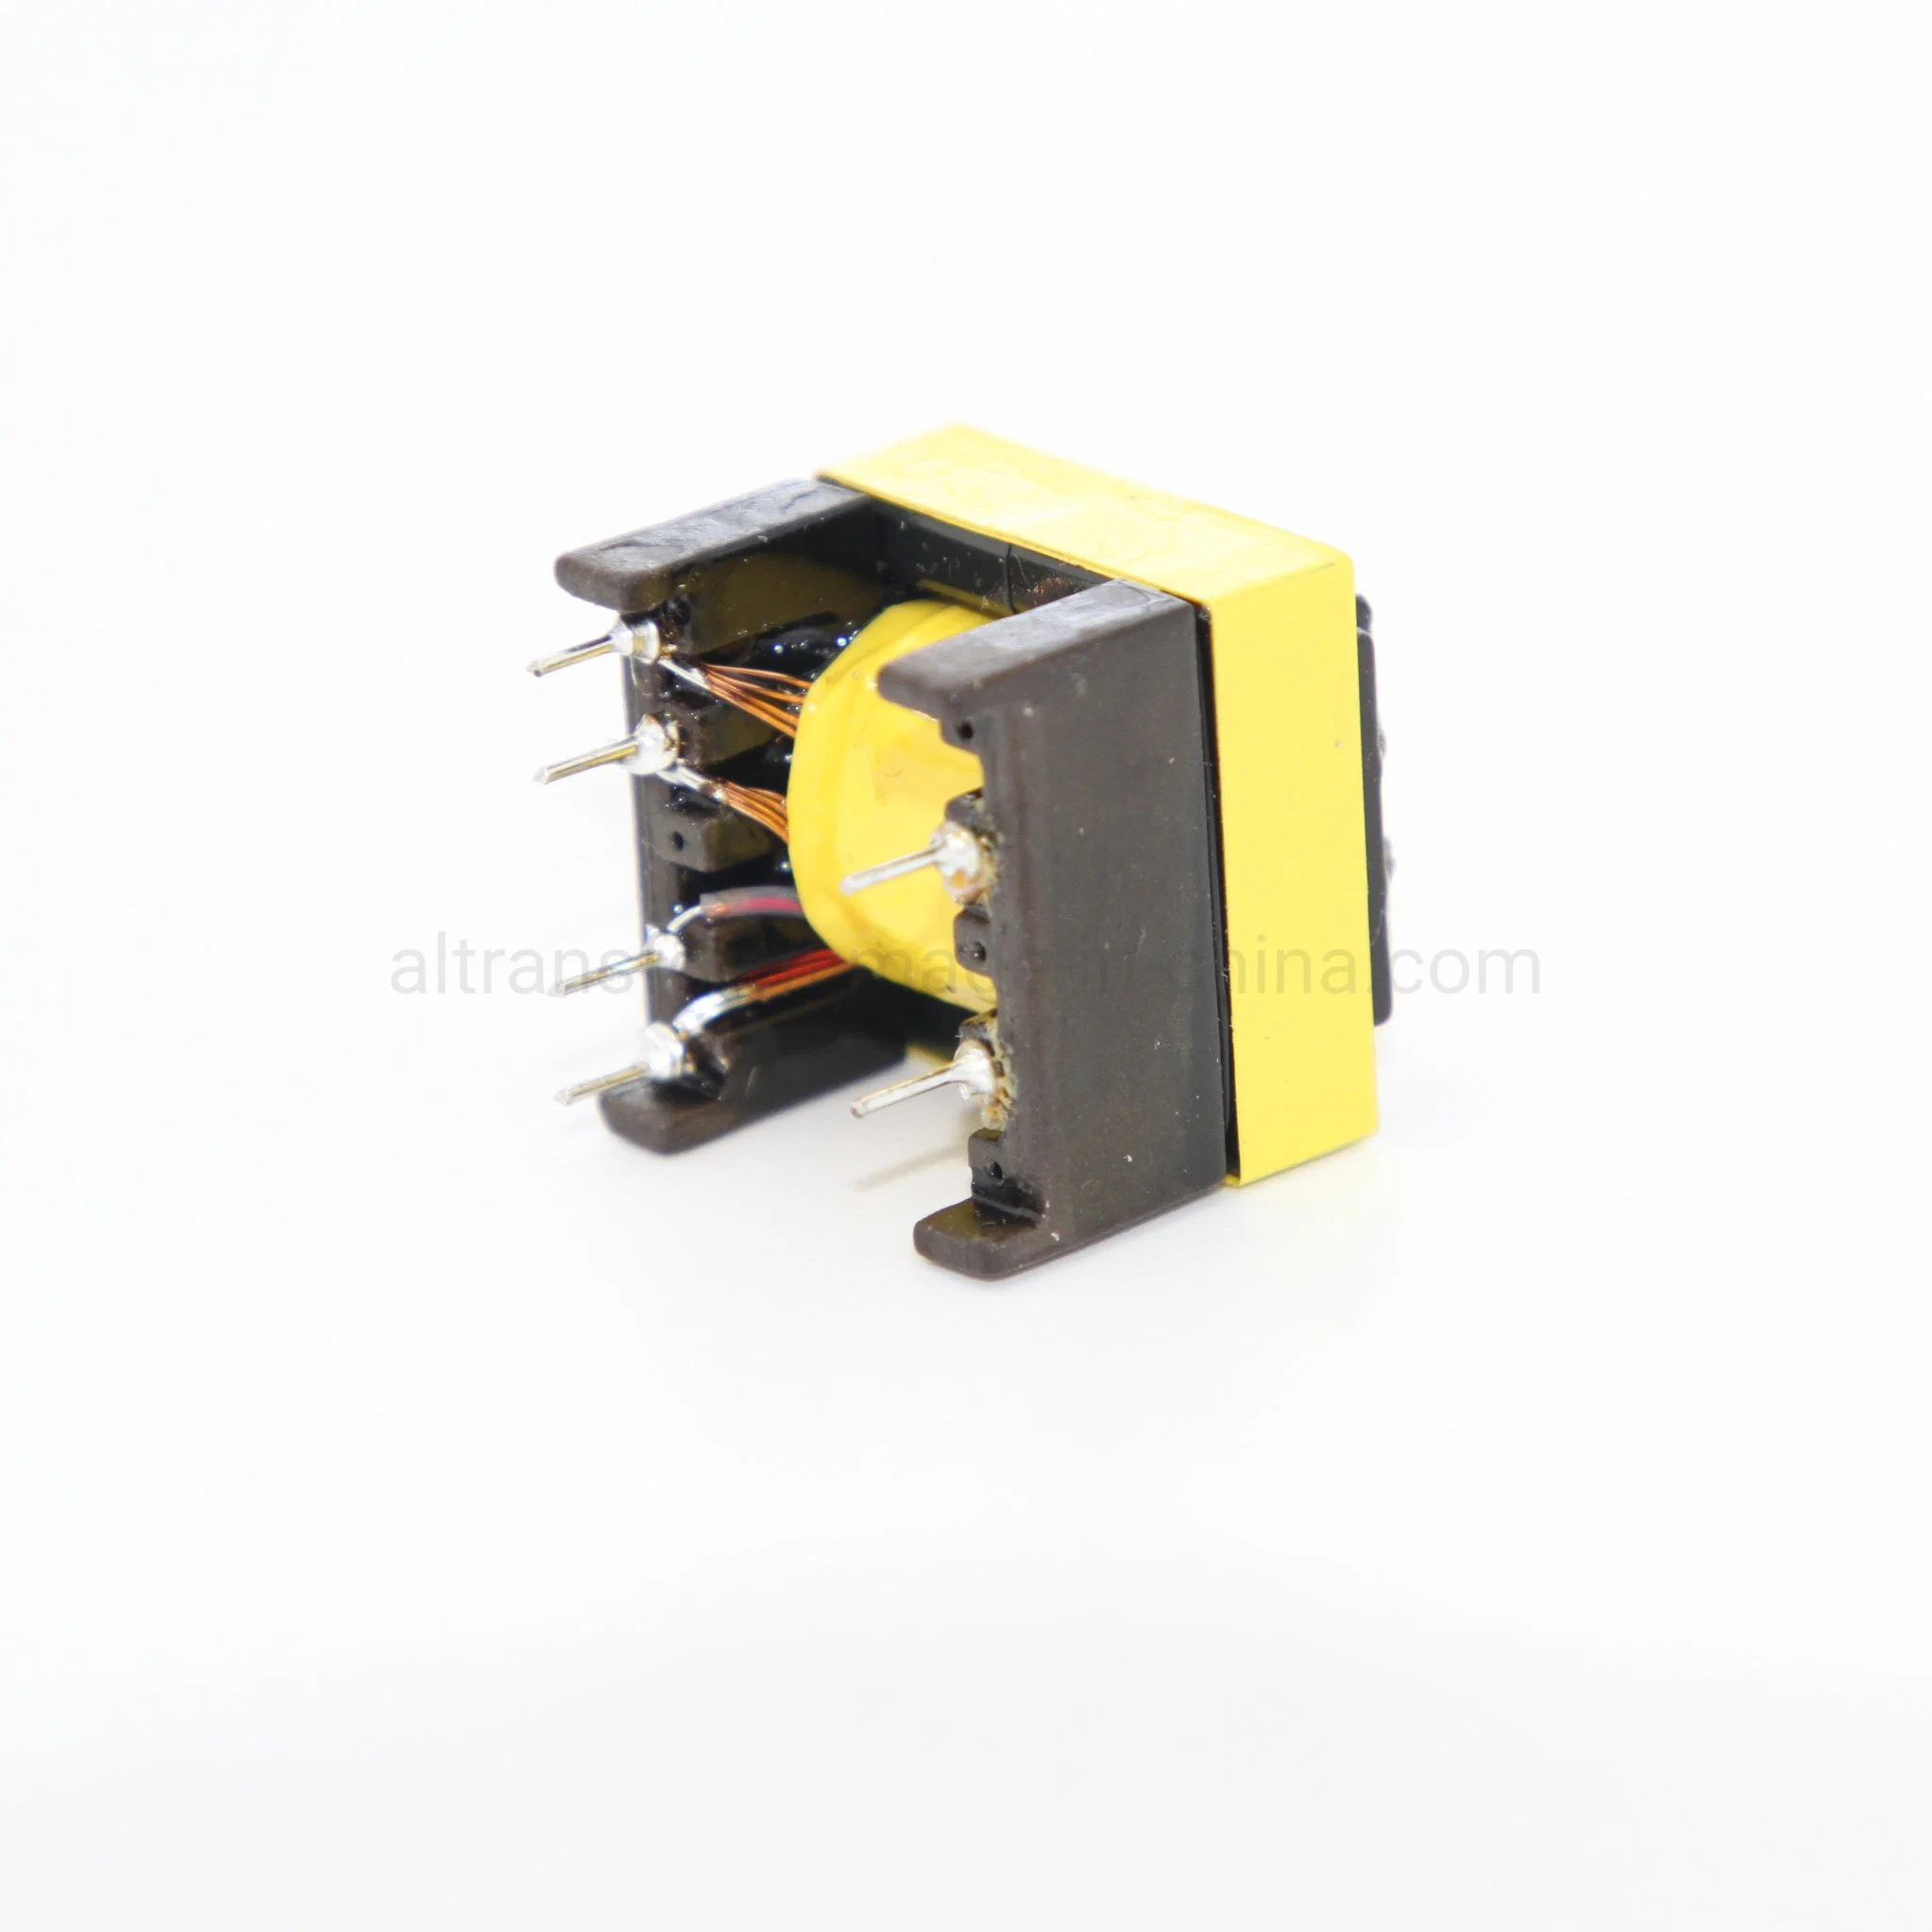 PCB Mount Type Electronical Transformer for LED Driver